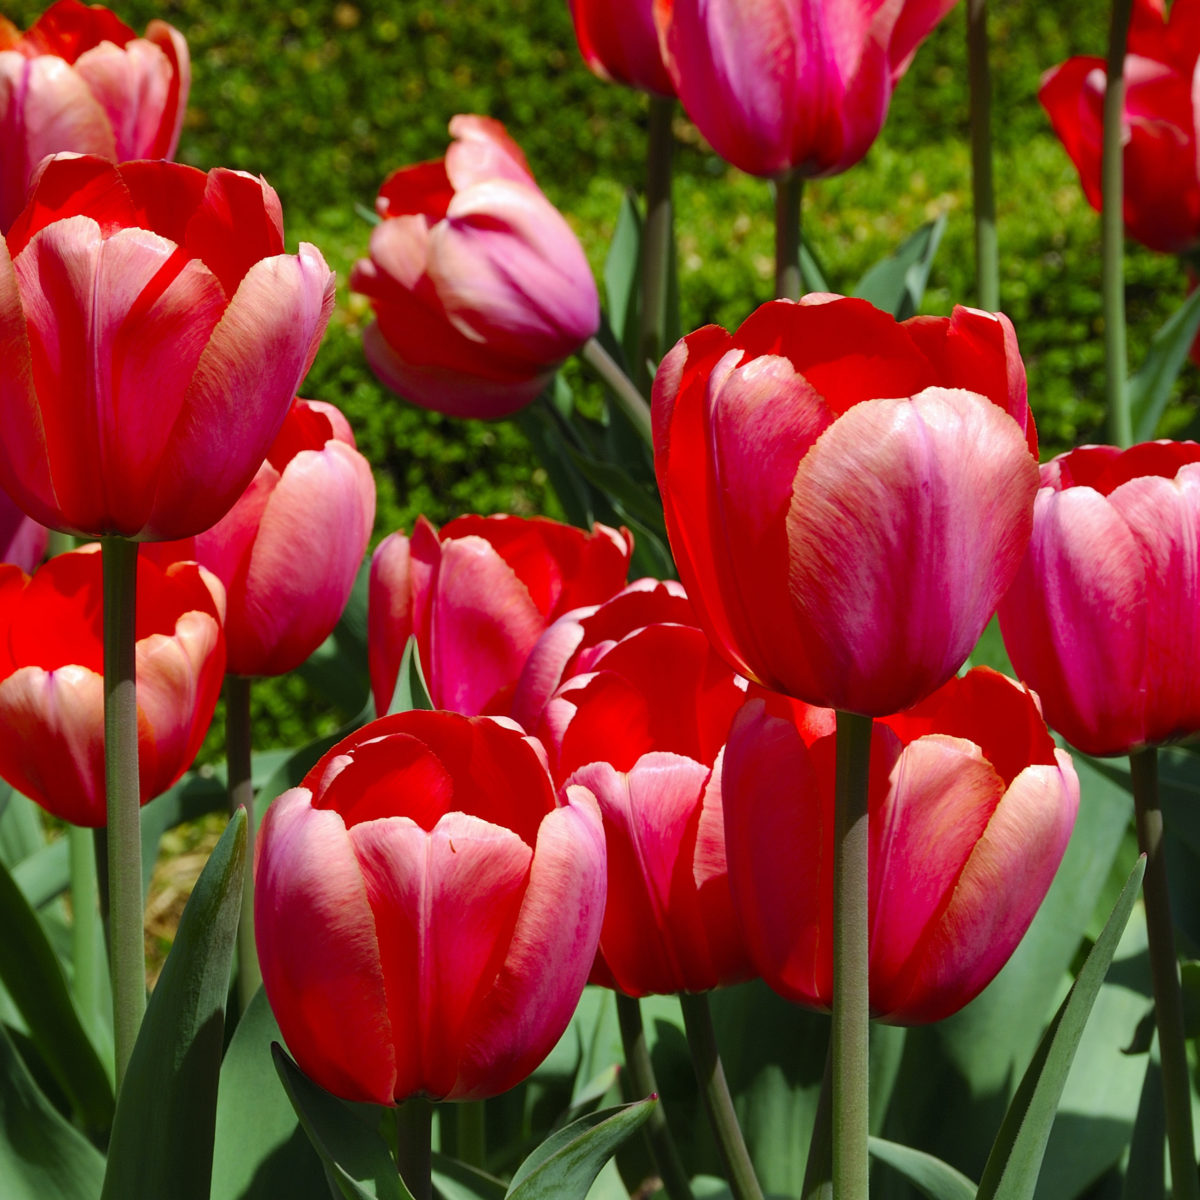 Red tulips at Applewood